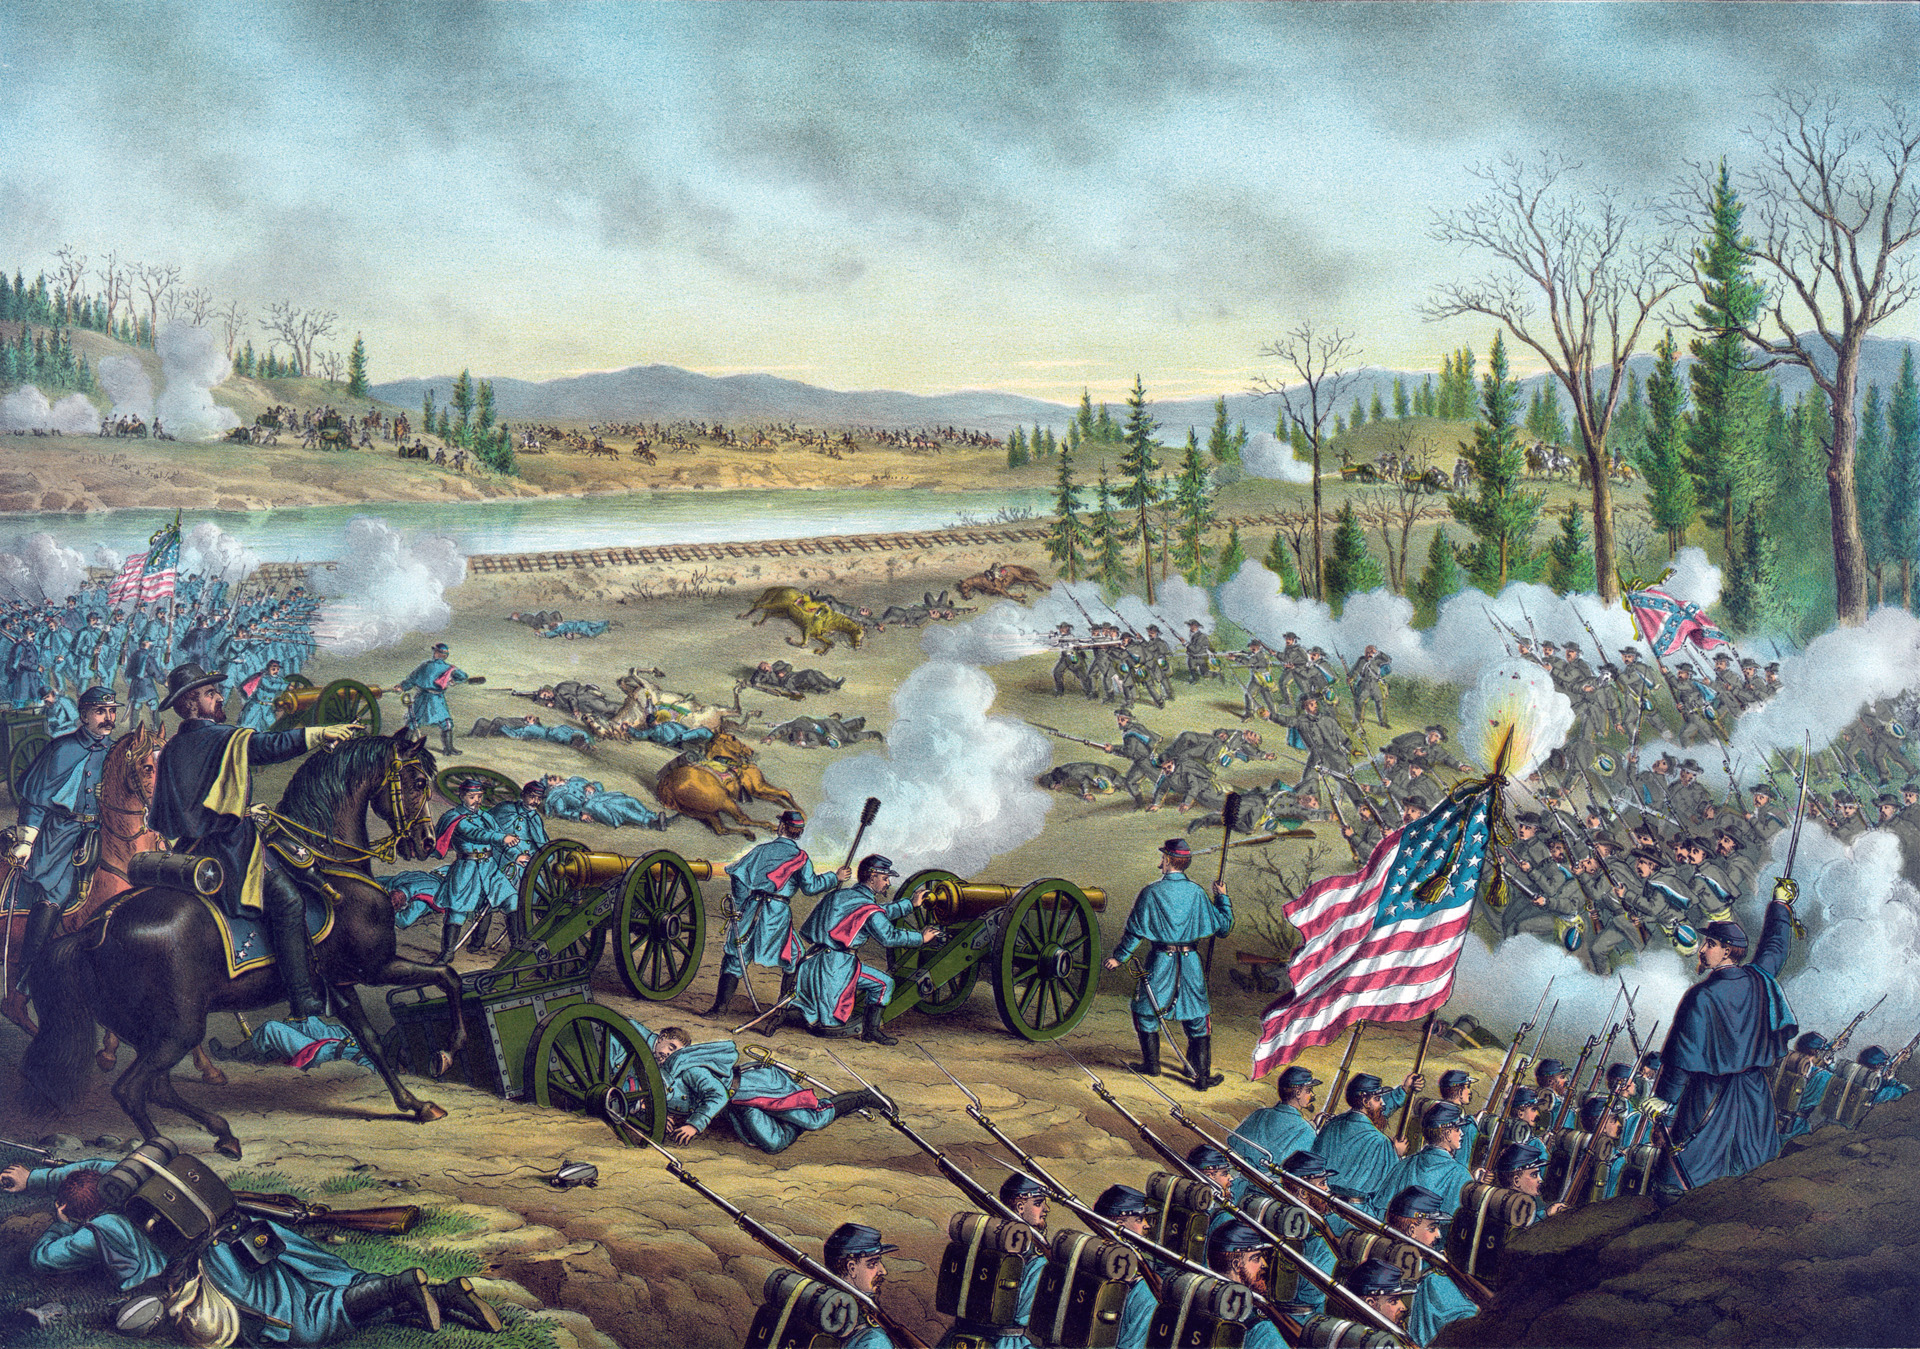 Maj. Gen. William S. Rosecrans at far left directs reinforcements to strengthen the Federal line in the face of a strong Confederate assault on the morning of December 31, 1862. 